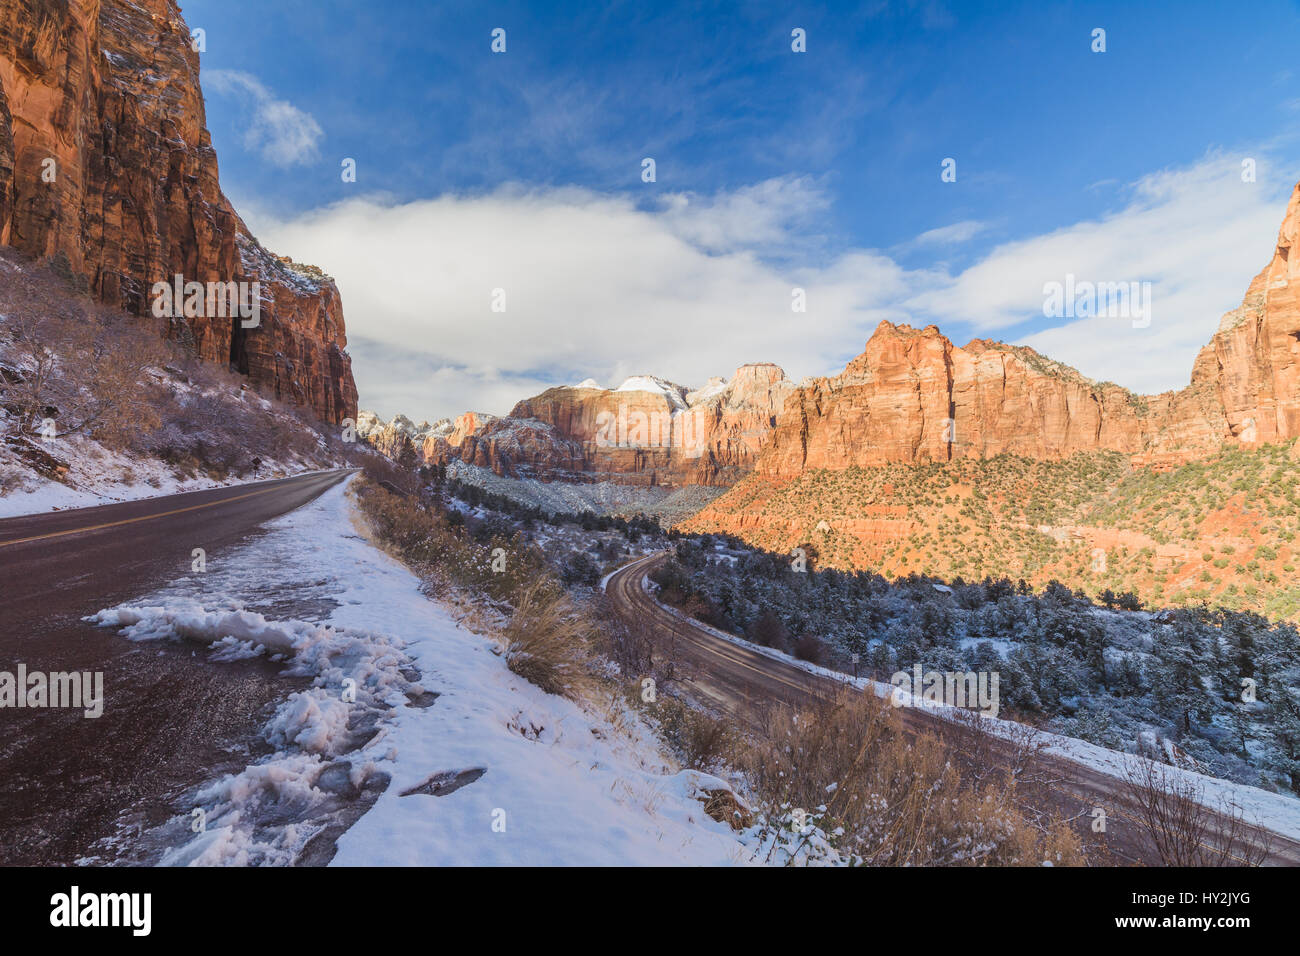 Snowy roads and blue skies at Zion National Park in southwest Utah, USA. Stock Photo